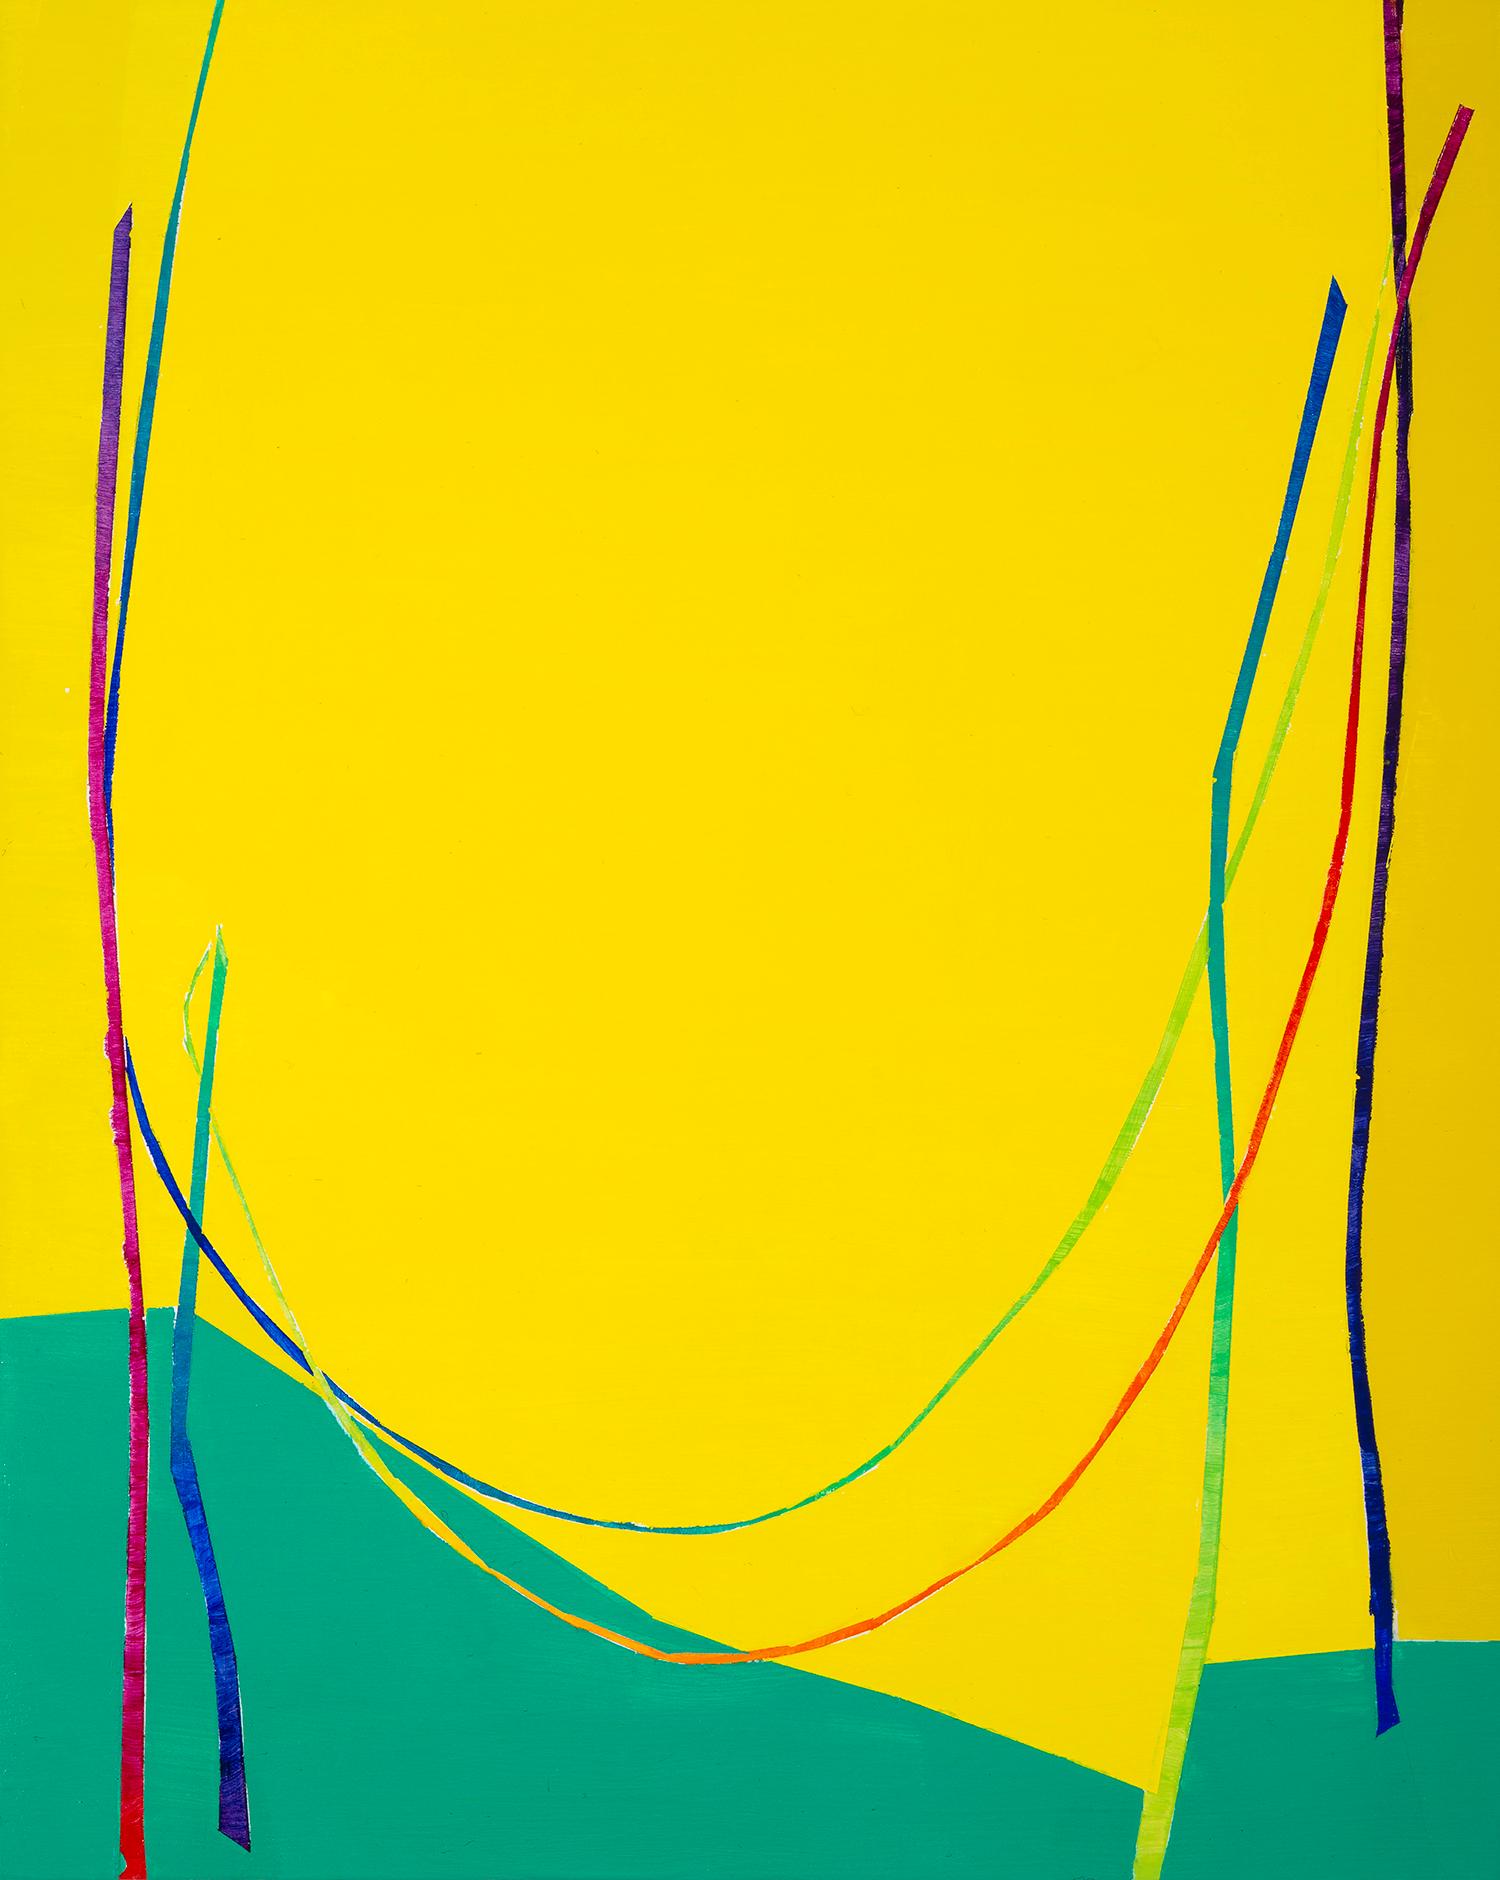 Paula Cahill Abstract Painting - Double Catenary: panel painting w/ multi-colored arc lines on yellow & green